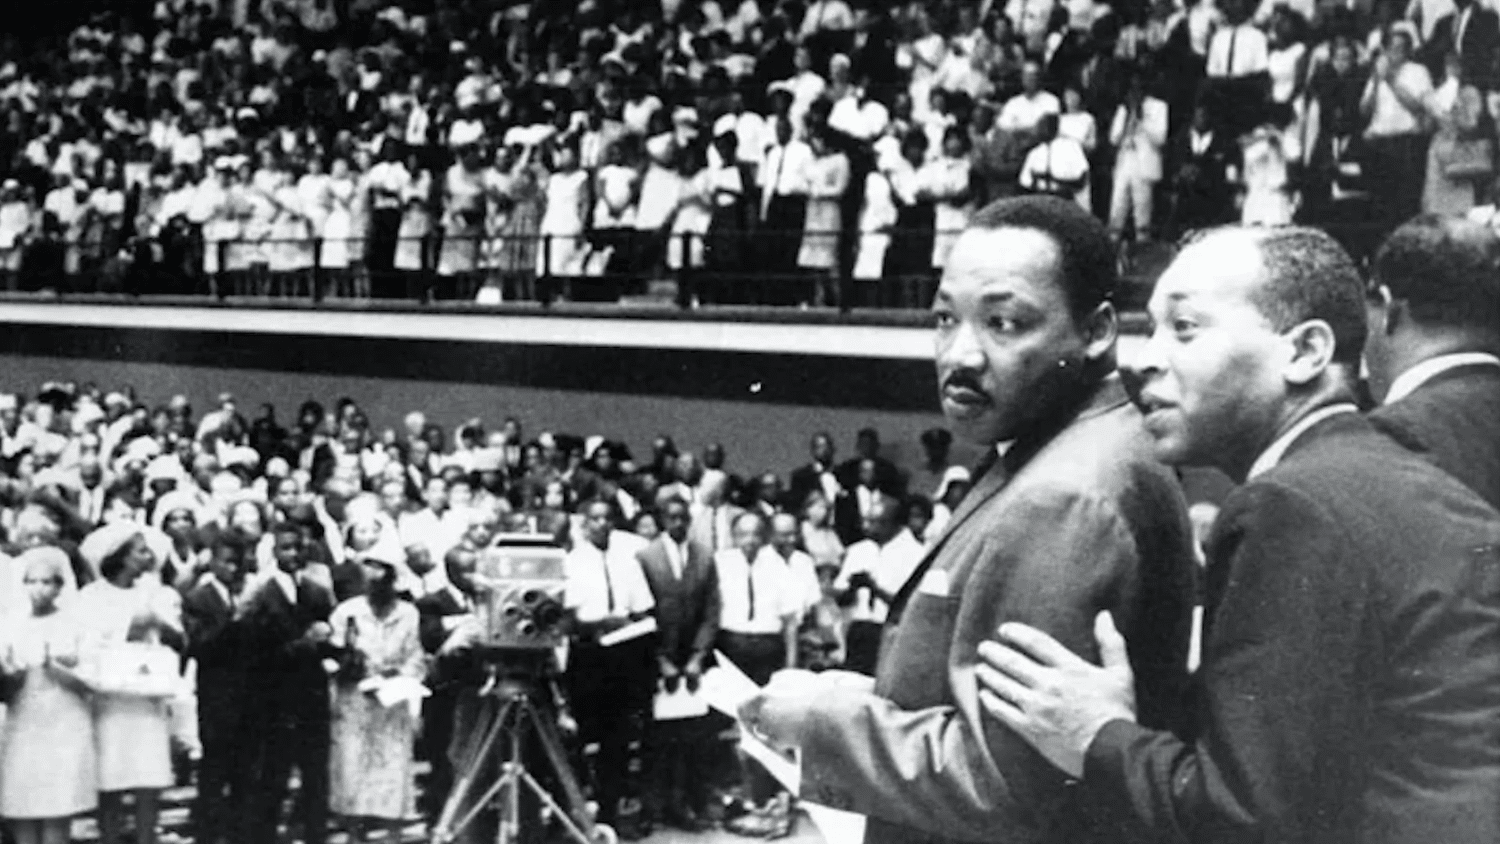 Martin Luther King Jr. in front of a crowd.